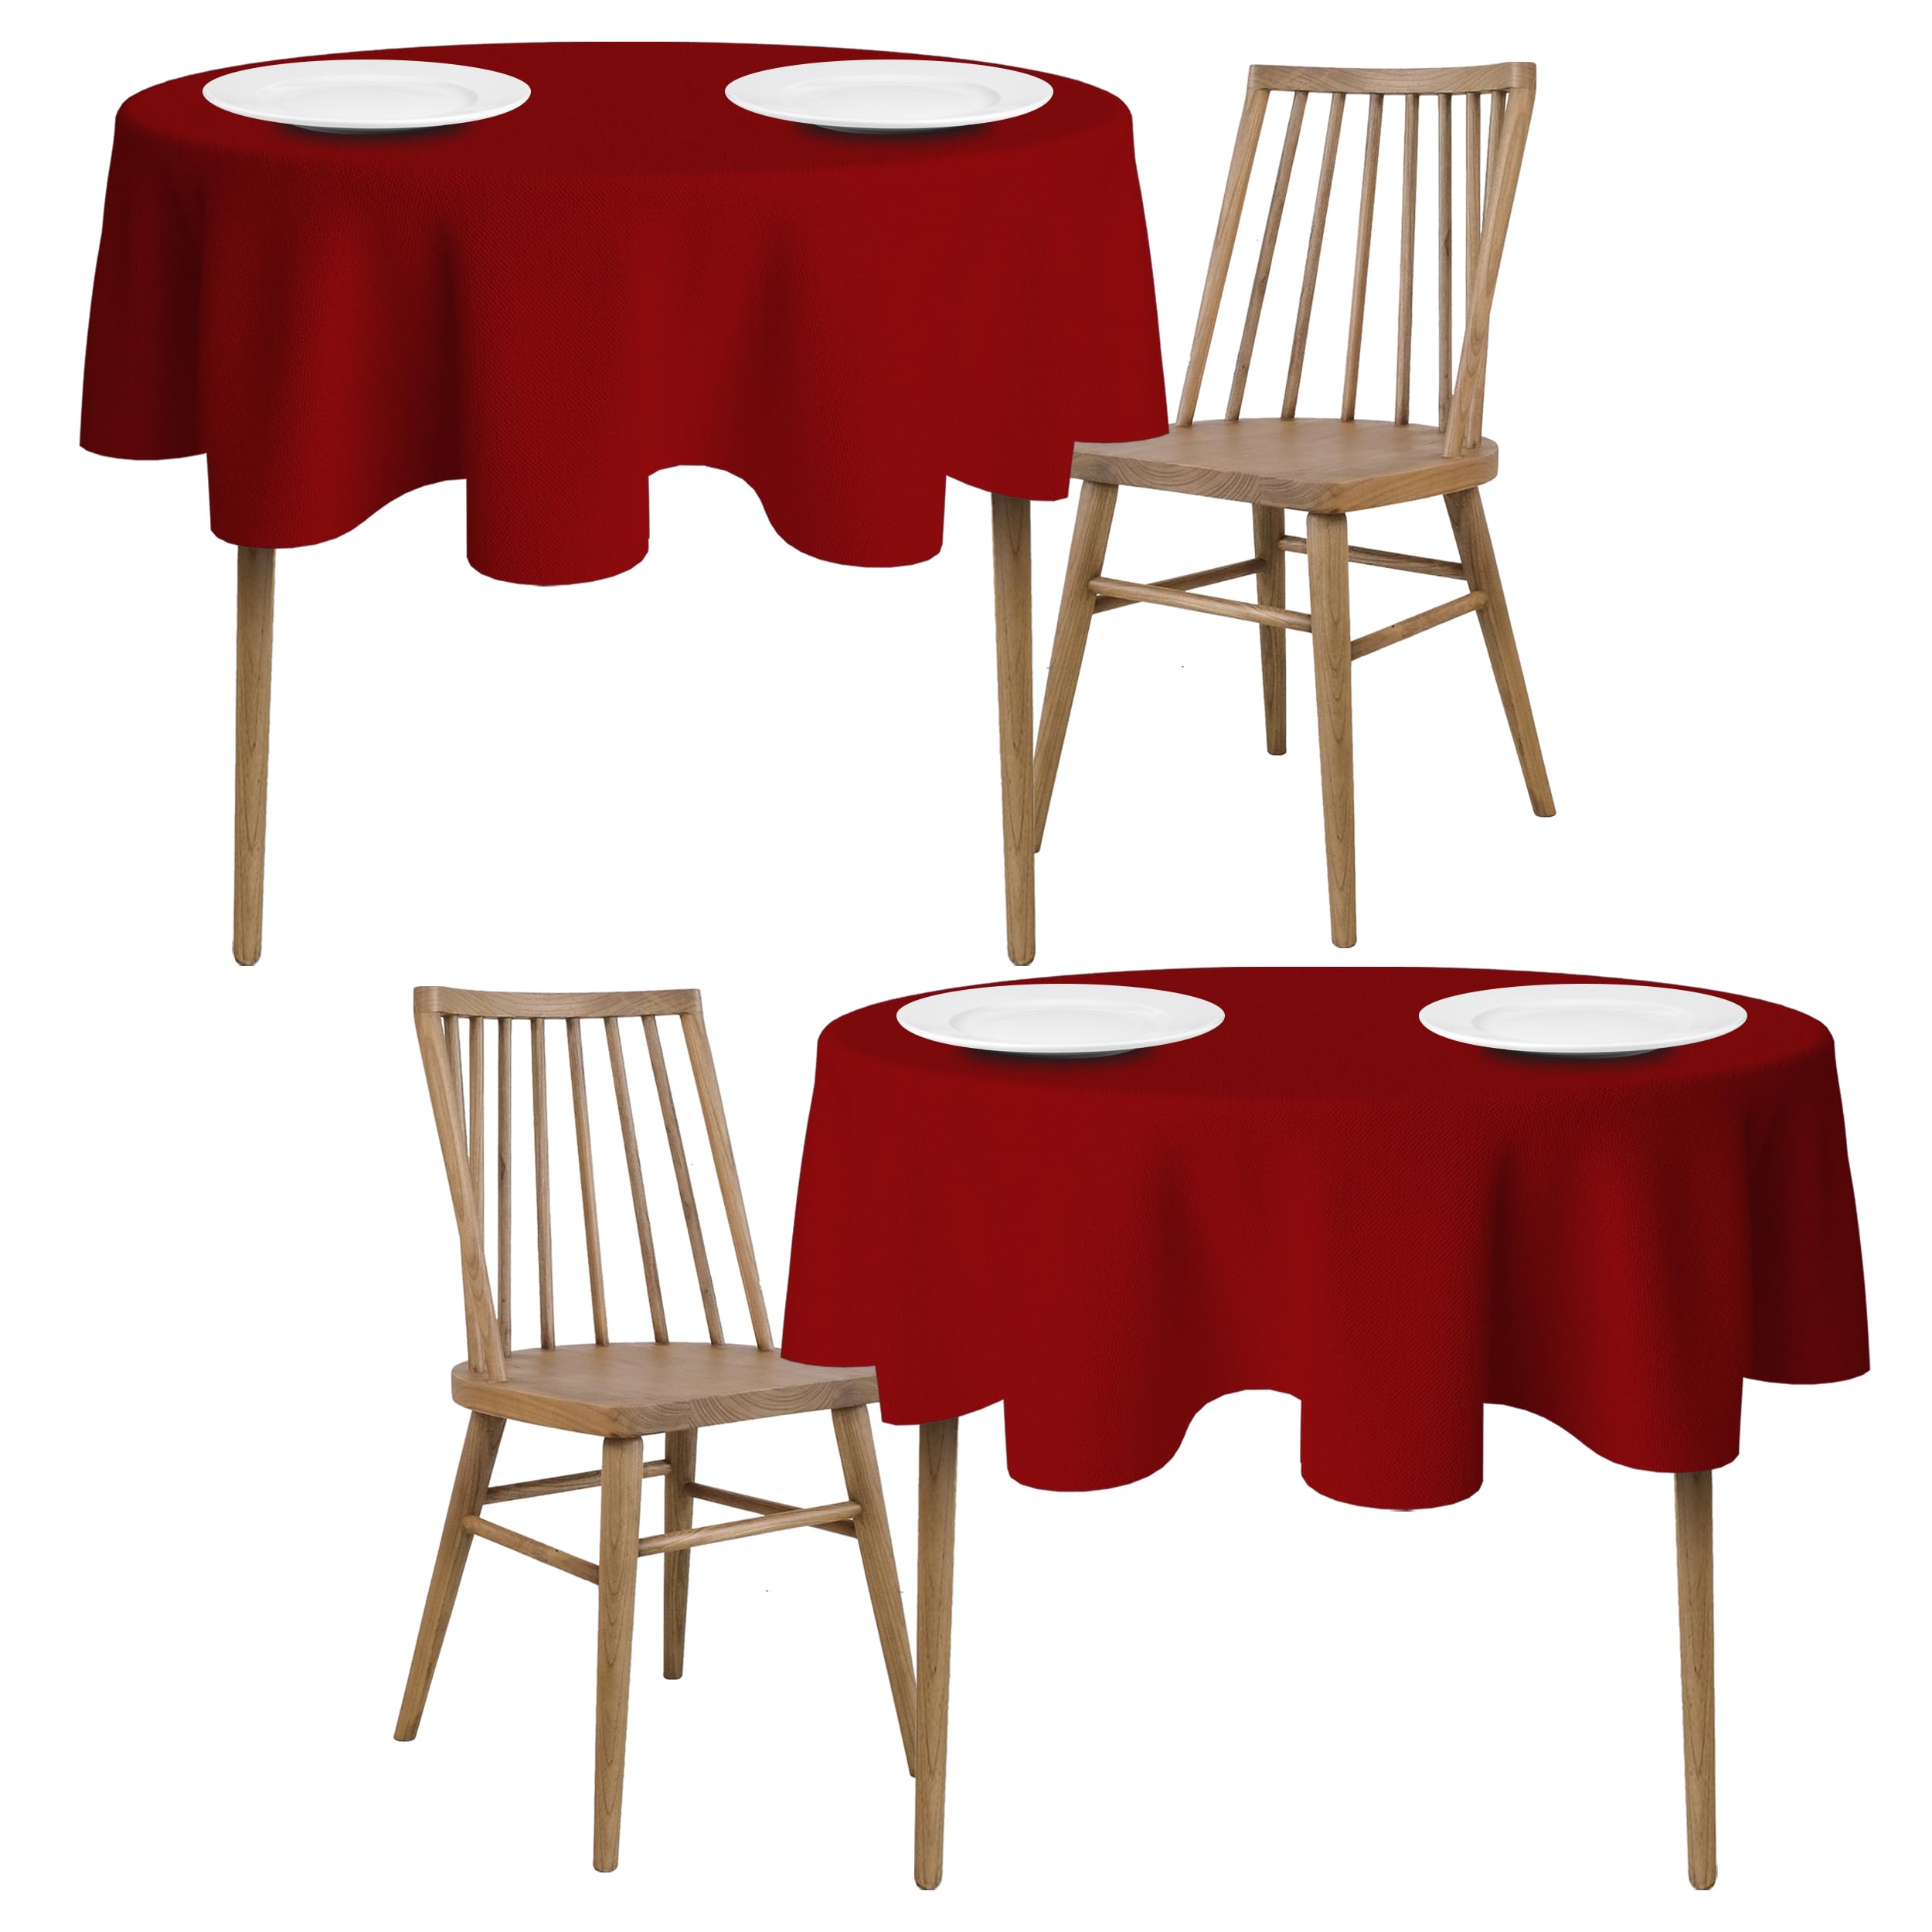 [2 Pack] Red Round Tablecloths 60 Inch [for 20-48'' Tables] 200 GSM Premium Quality Textured Washable Polyester Fabric Table Cloth [60'' is Not Table Size]  - Good